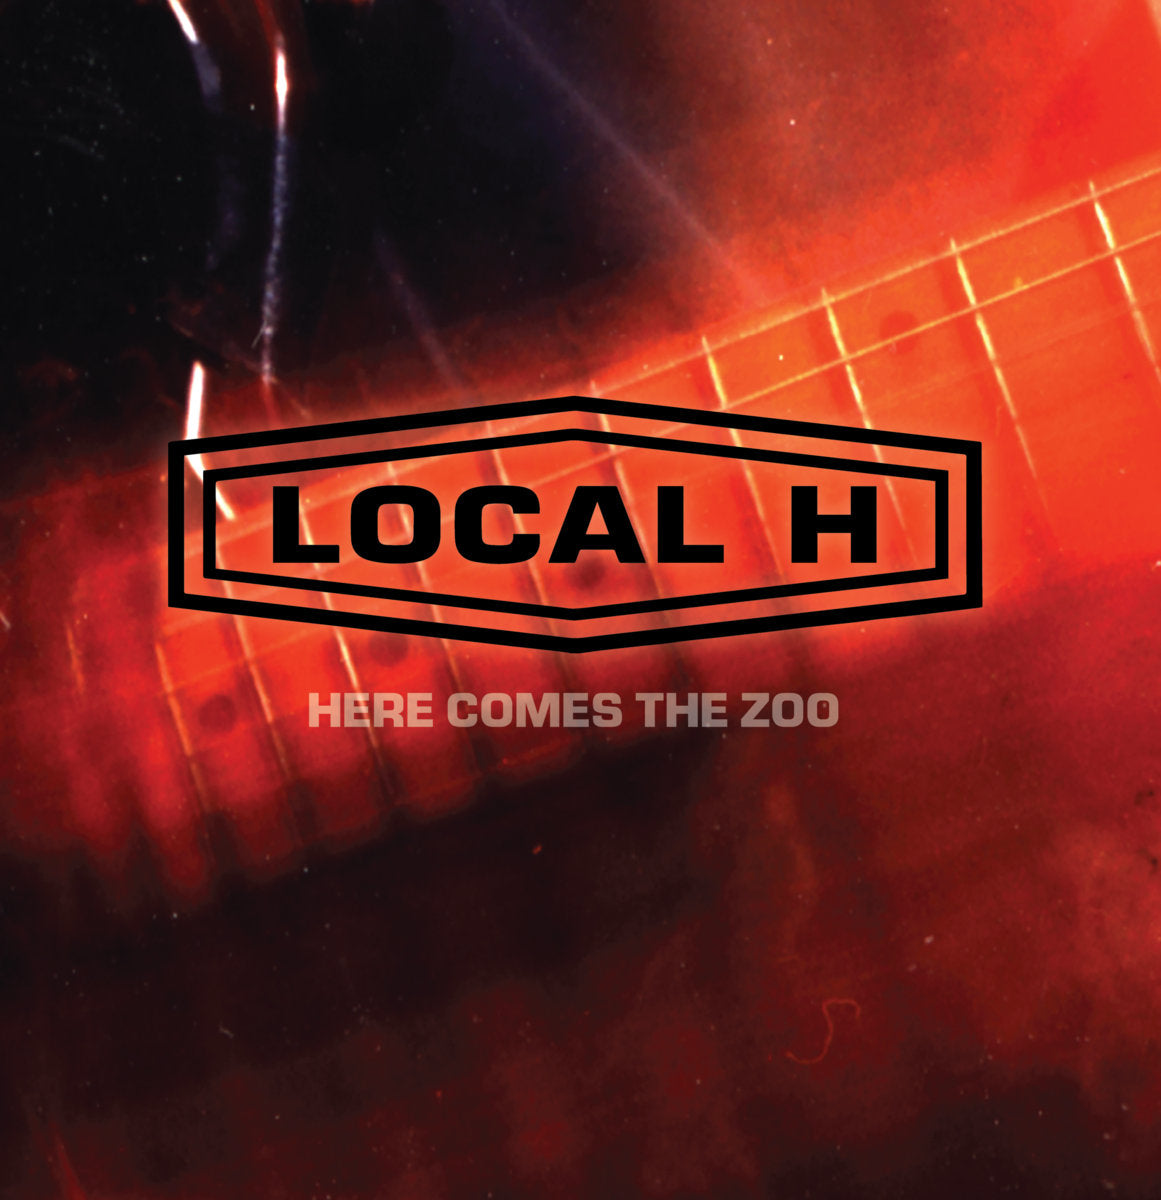 Local H - Here Comes the Zoo Bundle